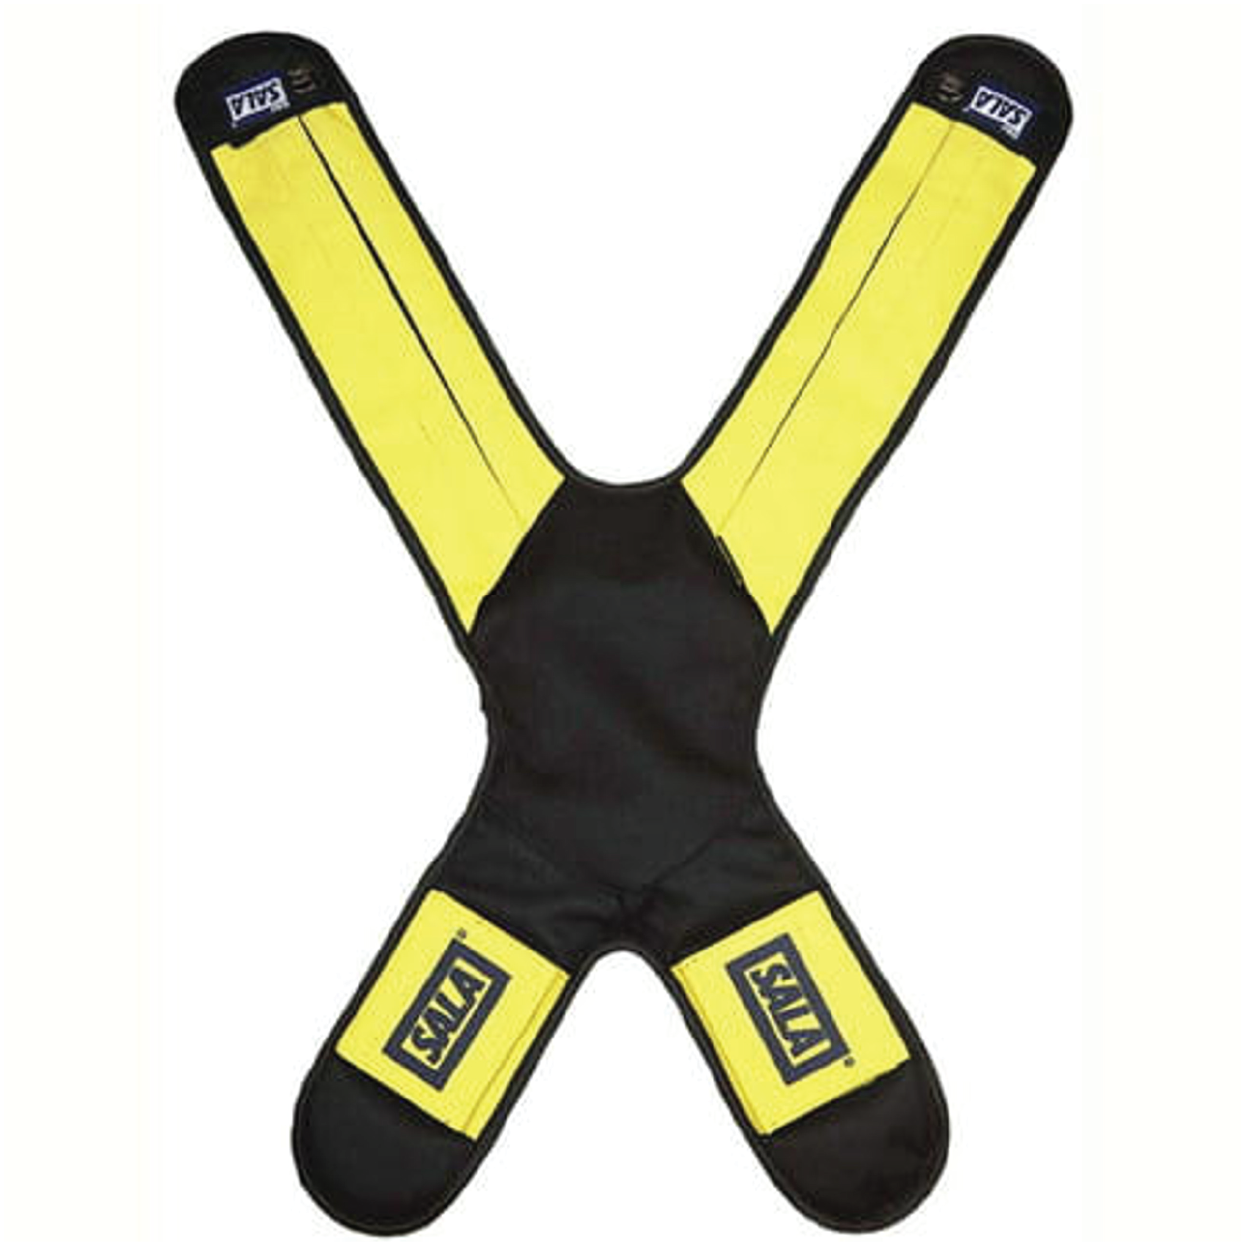 Accessories for Fall Protection Harnesses